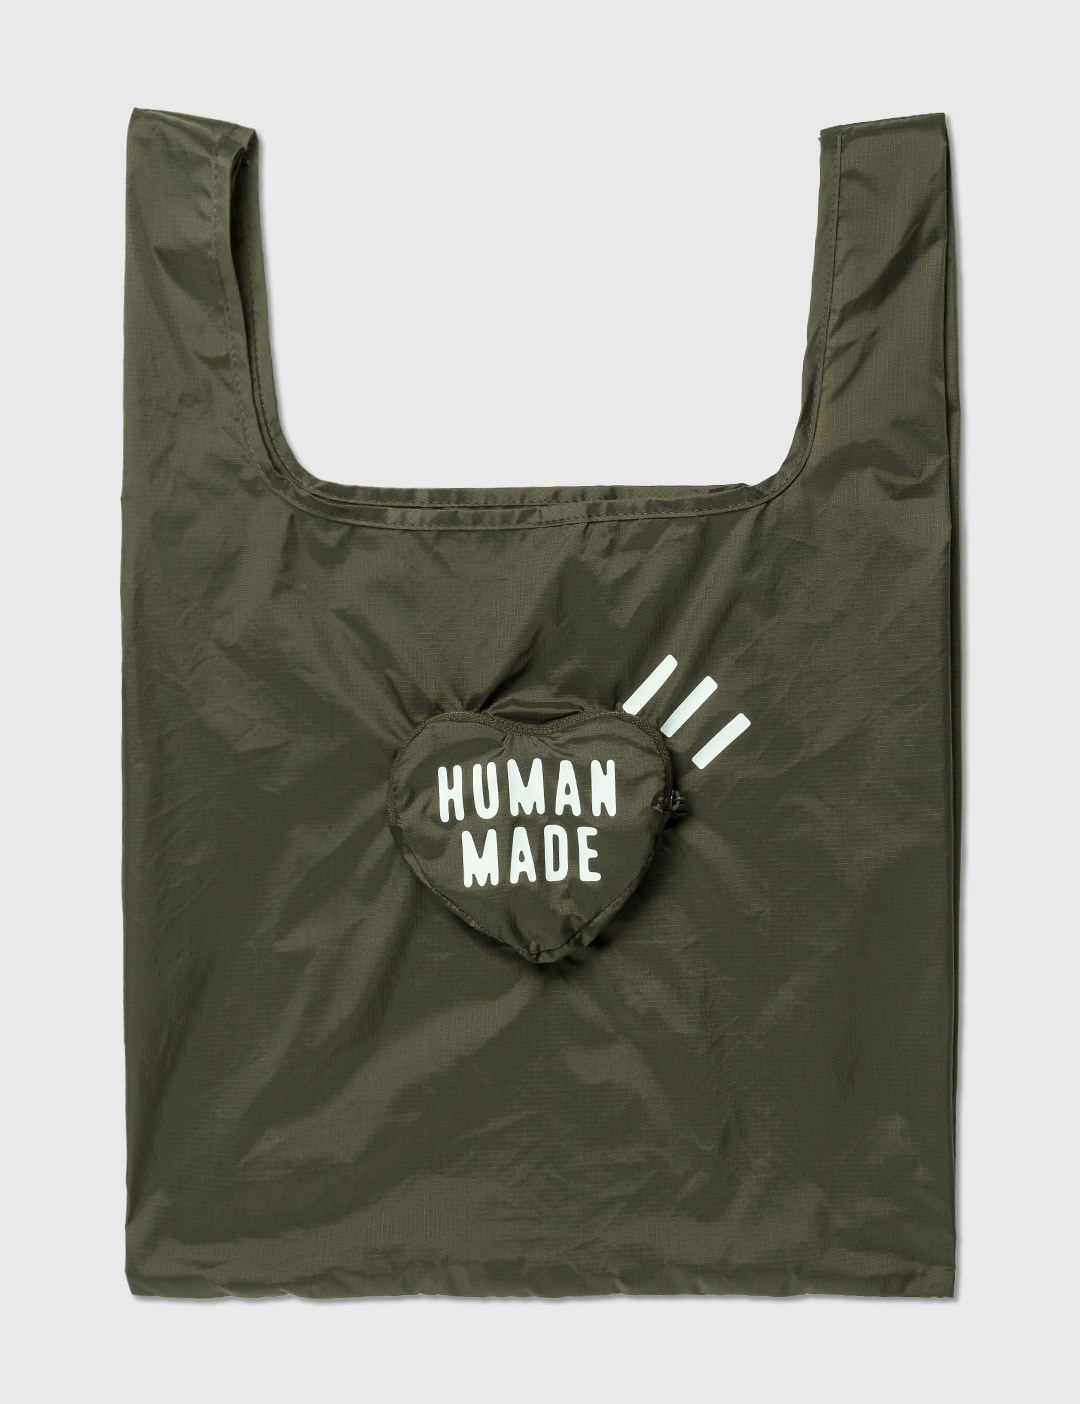 Shop HUMAN MADE Unisex Street Style Bags by sunnywalker